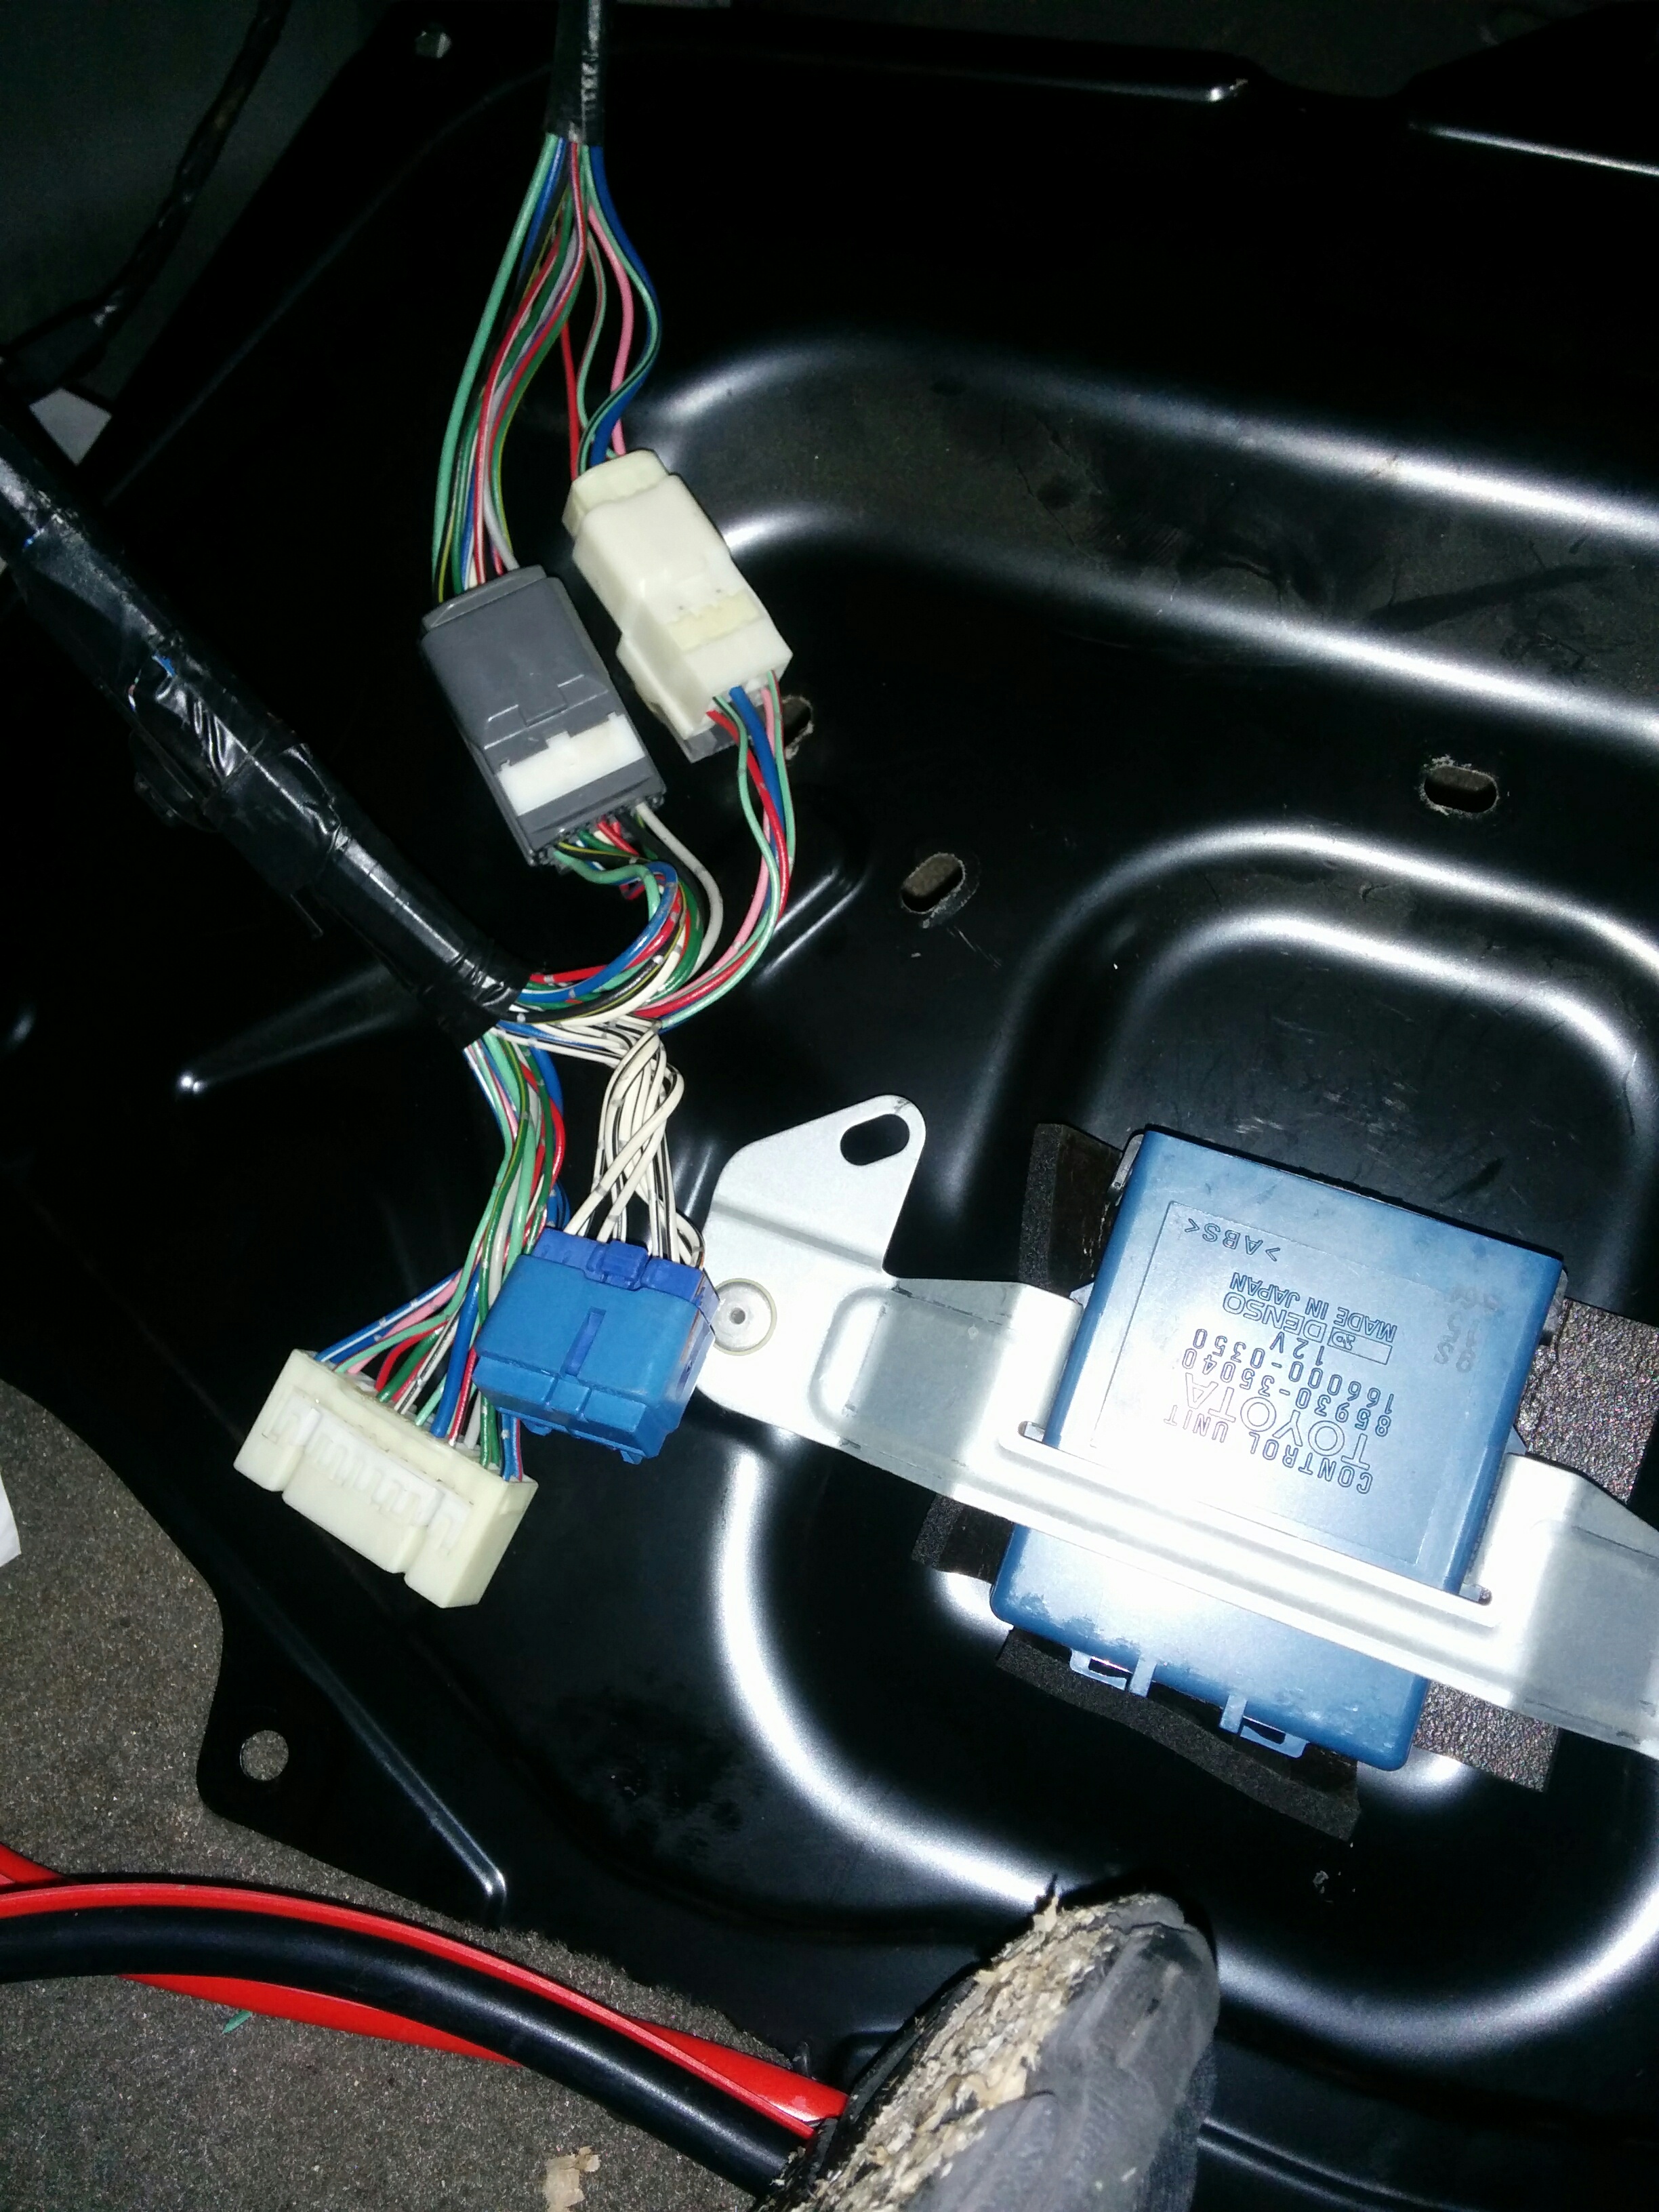 1998 4runner hatch wiring question (rear window, wipers ... 04 toyota 4runner fuse box 